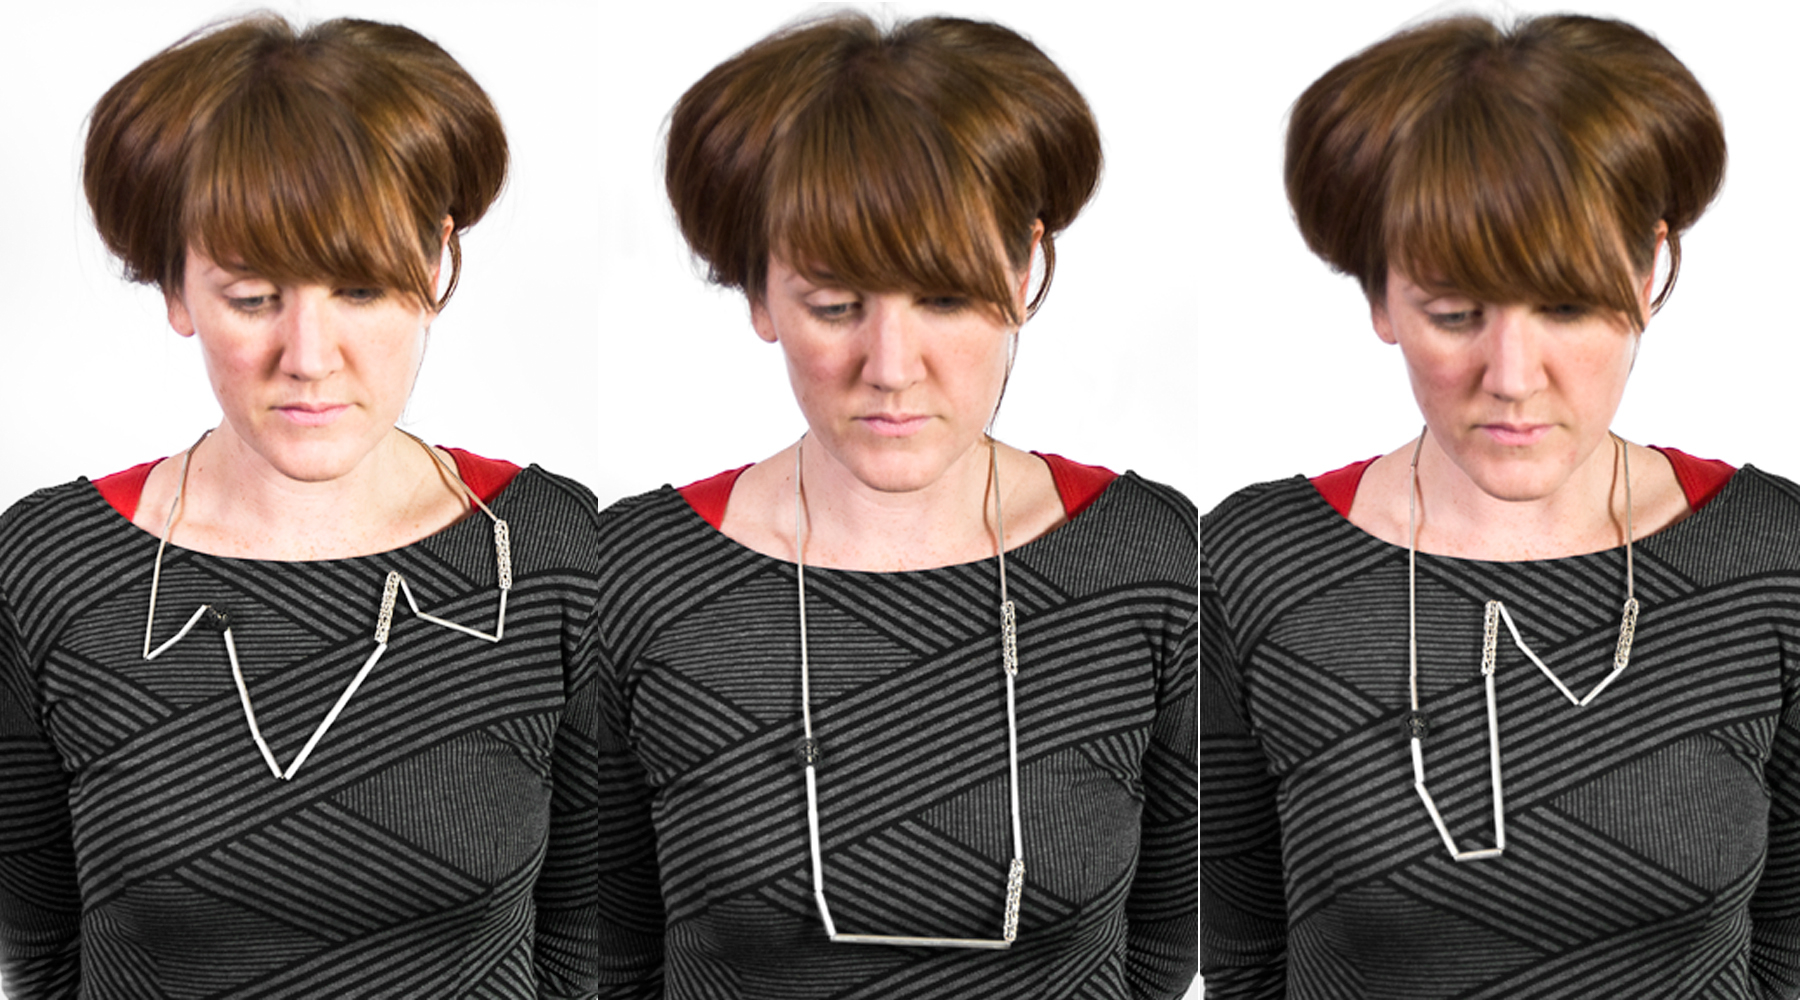 Sarah Holden wearing her Do-It-Yourself necklace. Image courtesy of the artist.